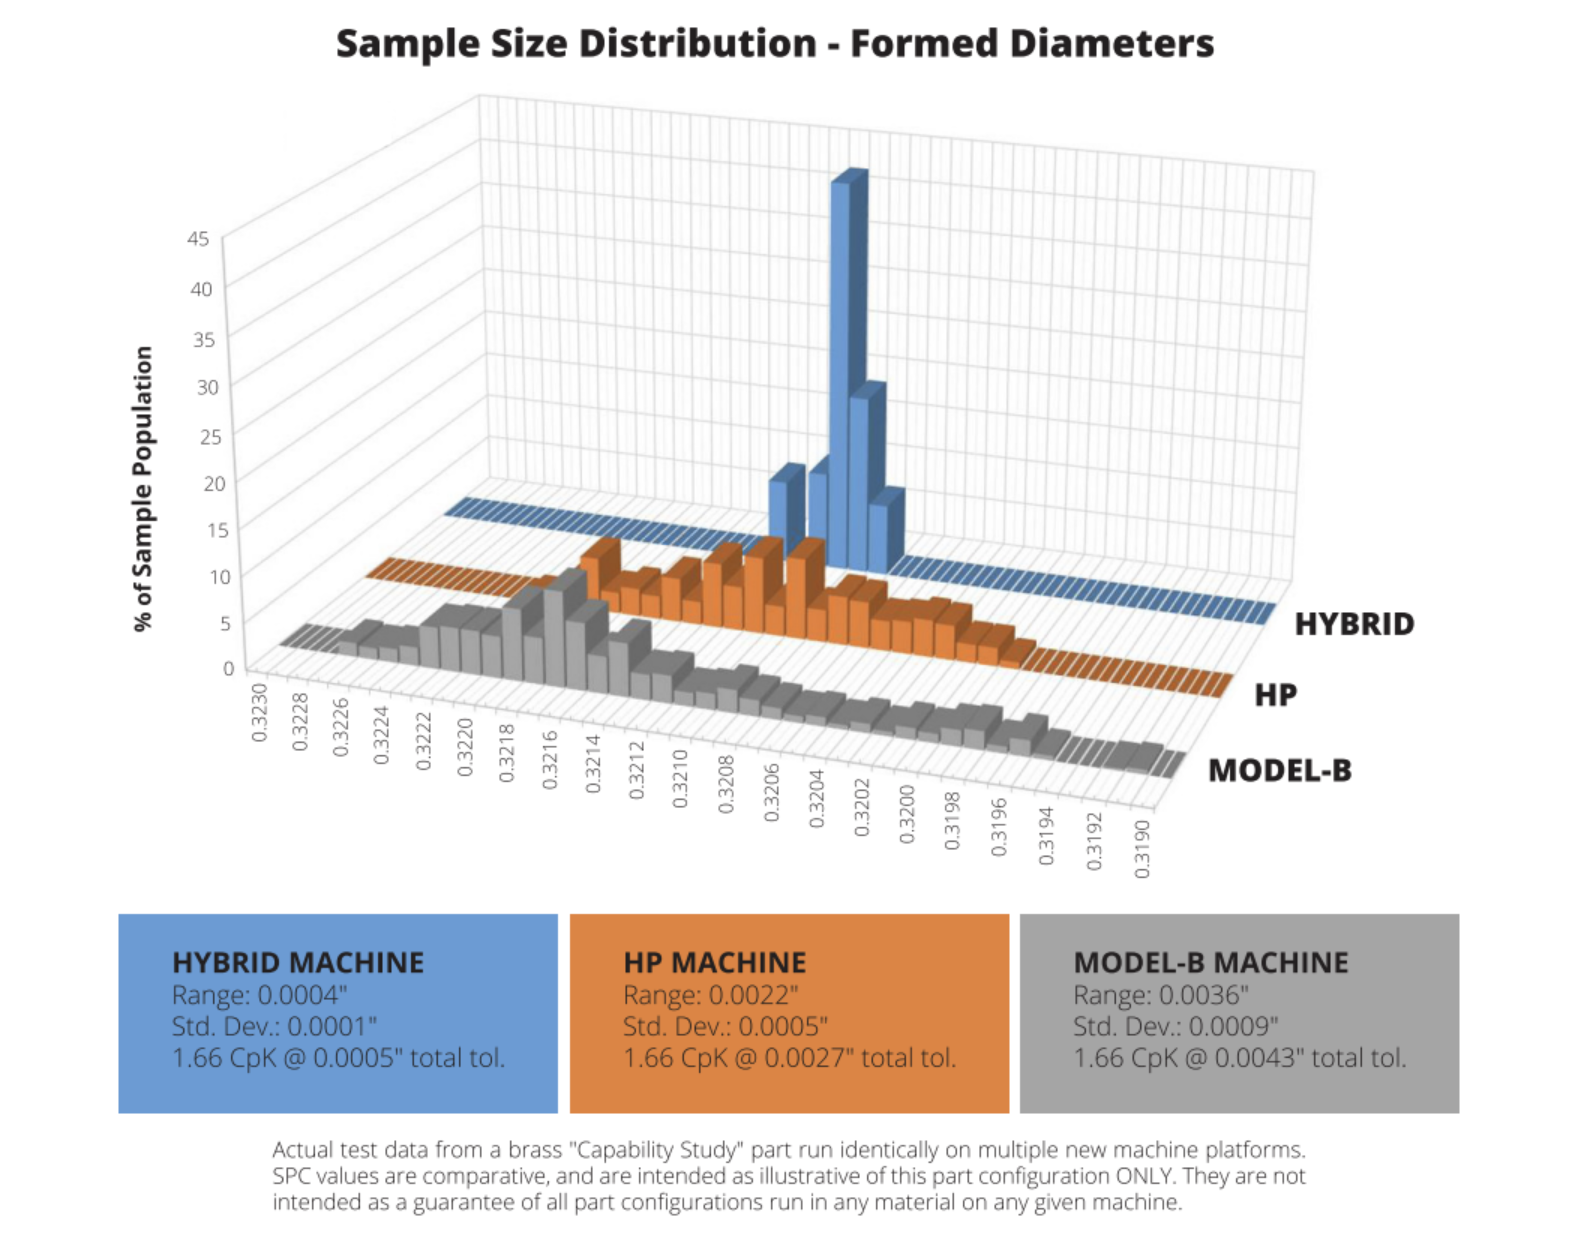 A chart addressing workforce challenges related to sample size distribution of formed diameters using the Davenport Hybrid Machine